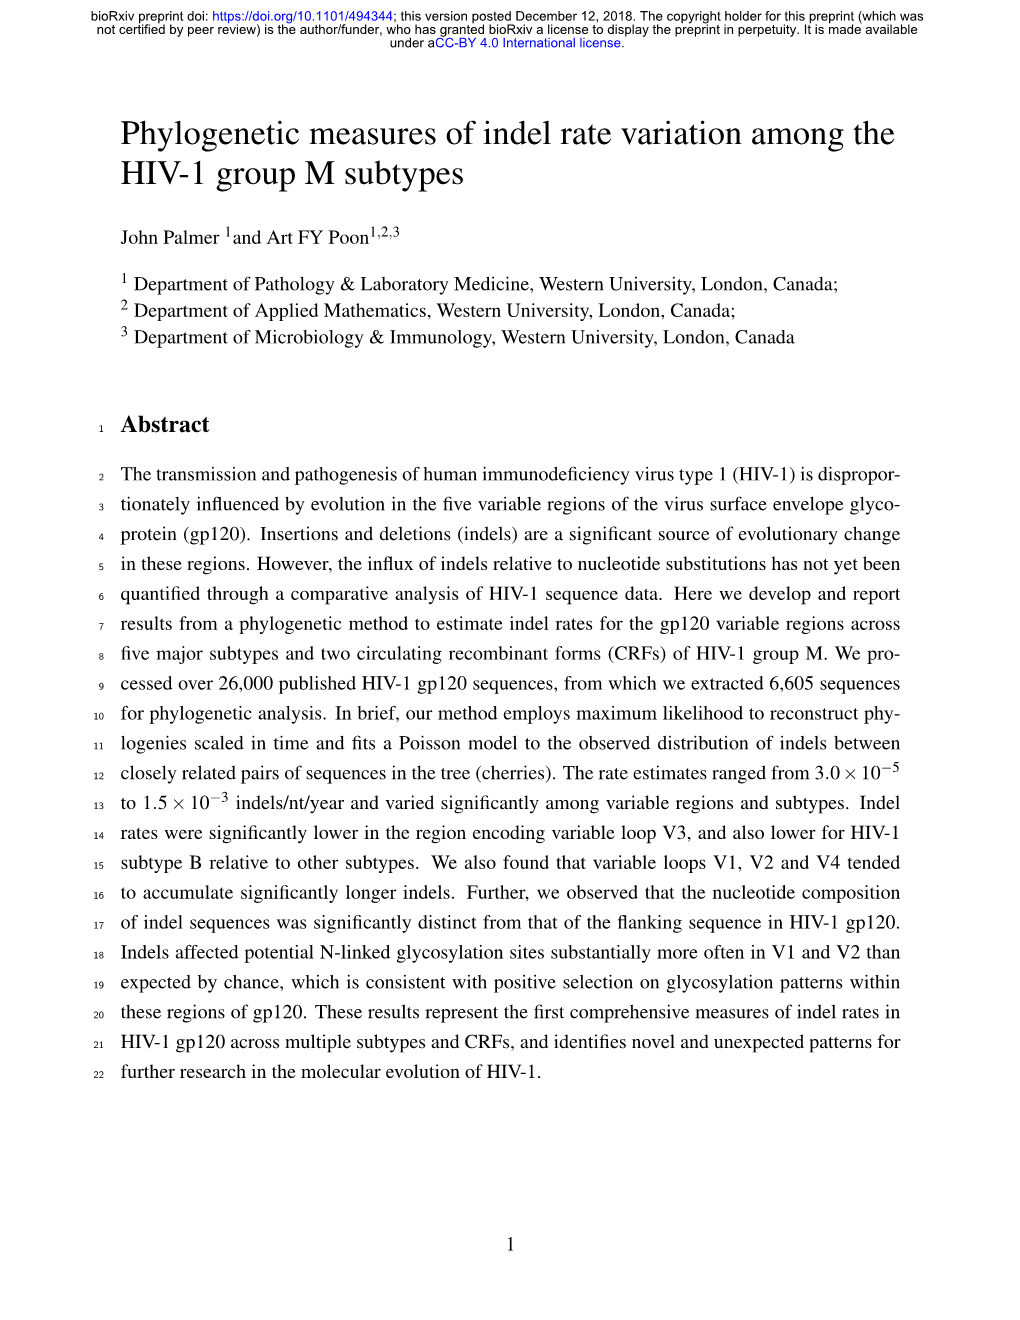 Phylogenetic Measures of Indel Rate Variation Among the HIV-1 Group M Subtypes